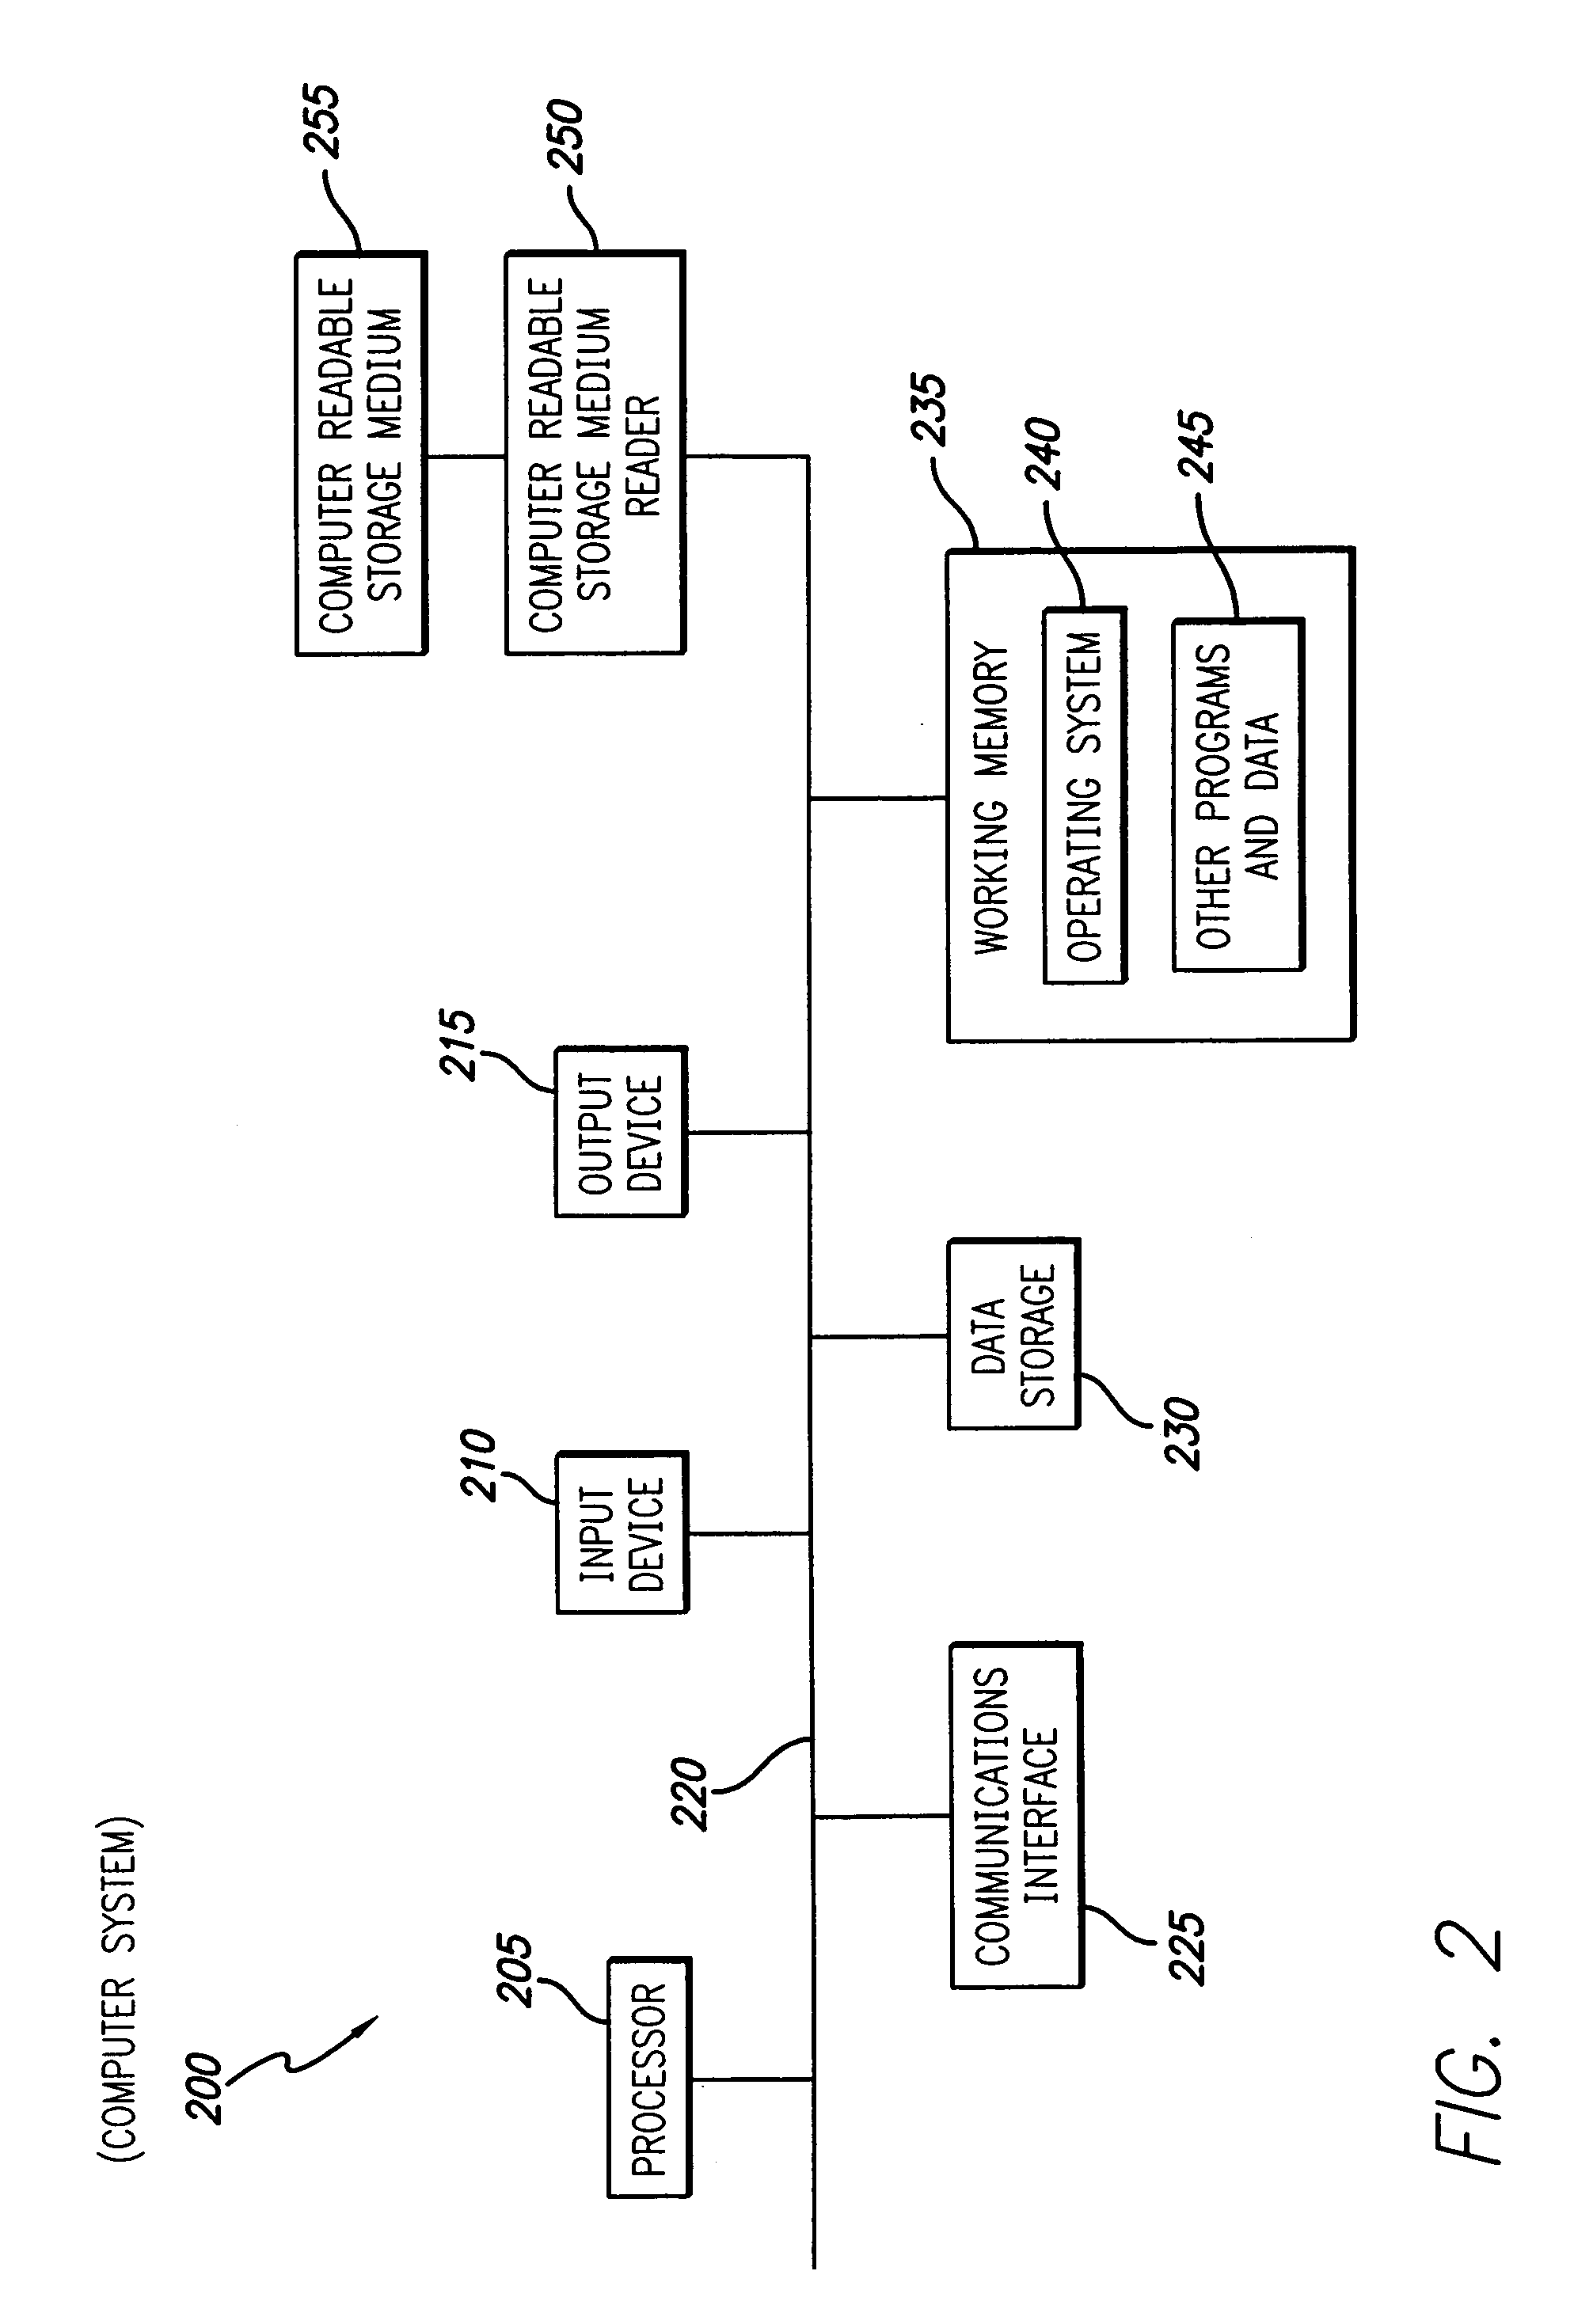 System and method for encrypting and decrypting files